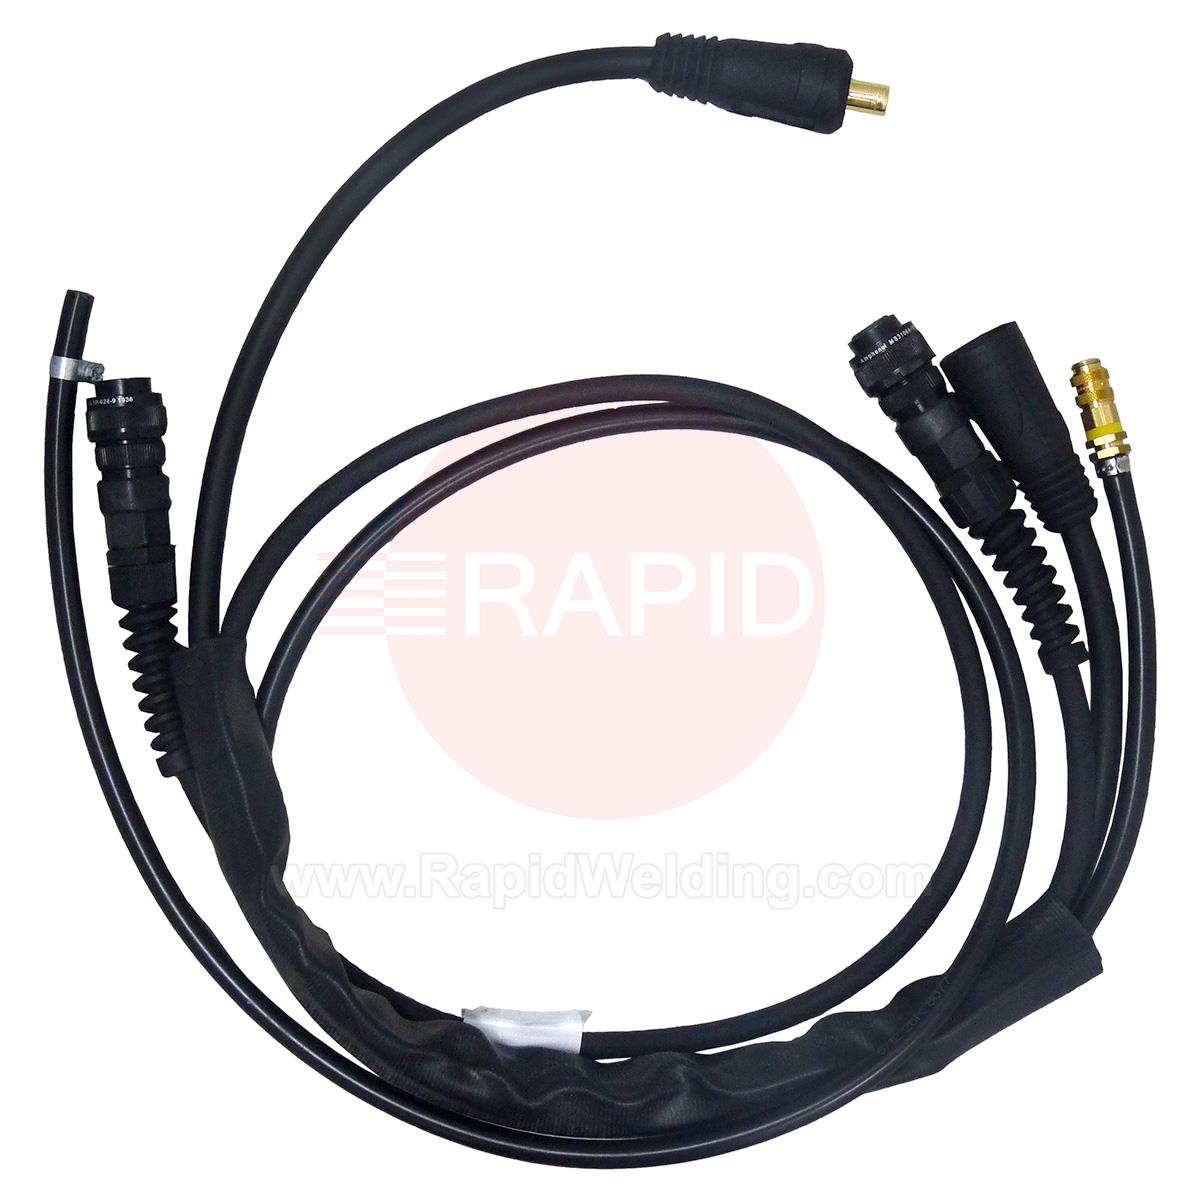 626010X01  Kemppi Kempoweld Interconnection Cable - Air Cooled